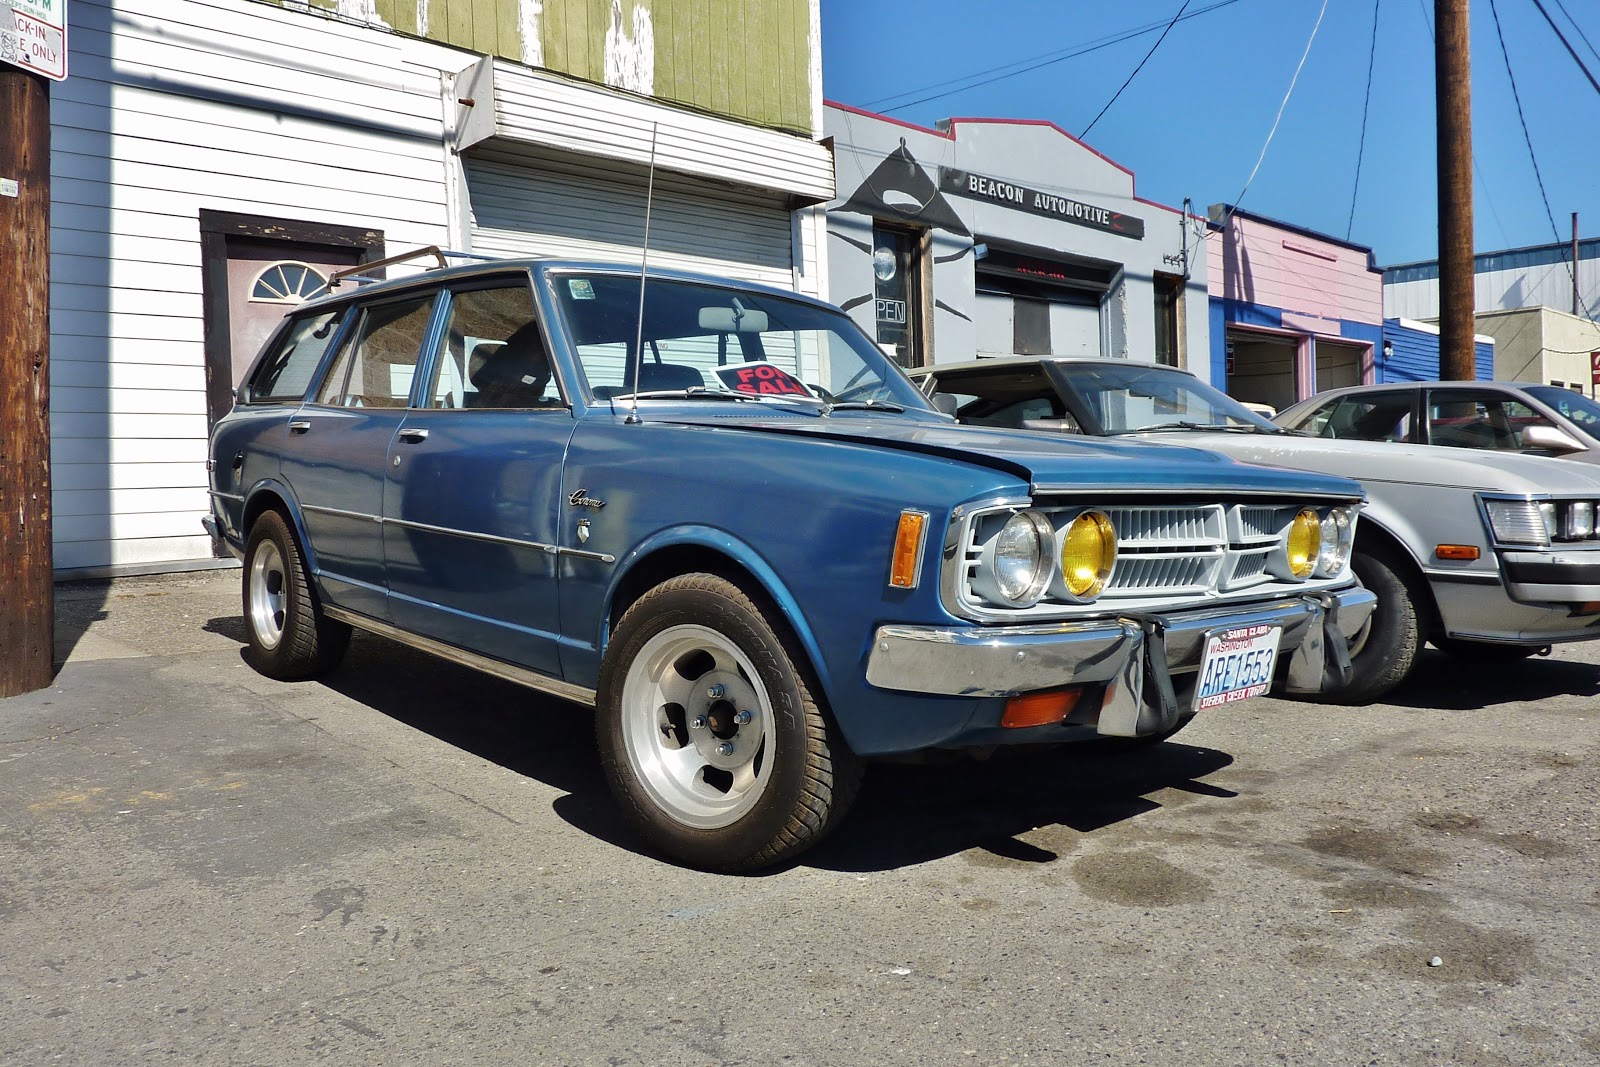 Seattle's Parked Cars: 1973 Toyota Corona Deluxe Wagon